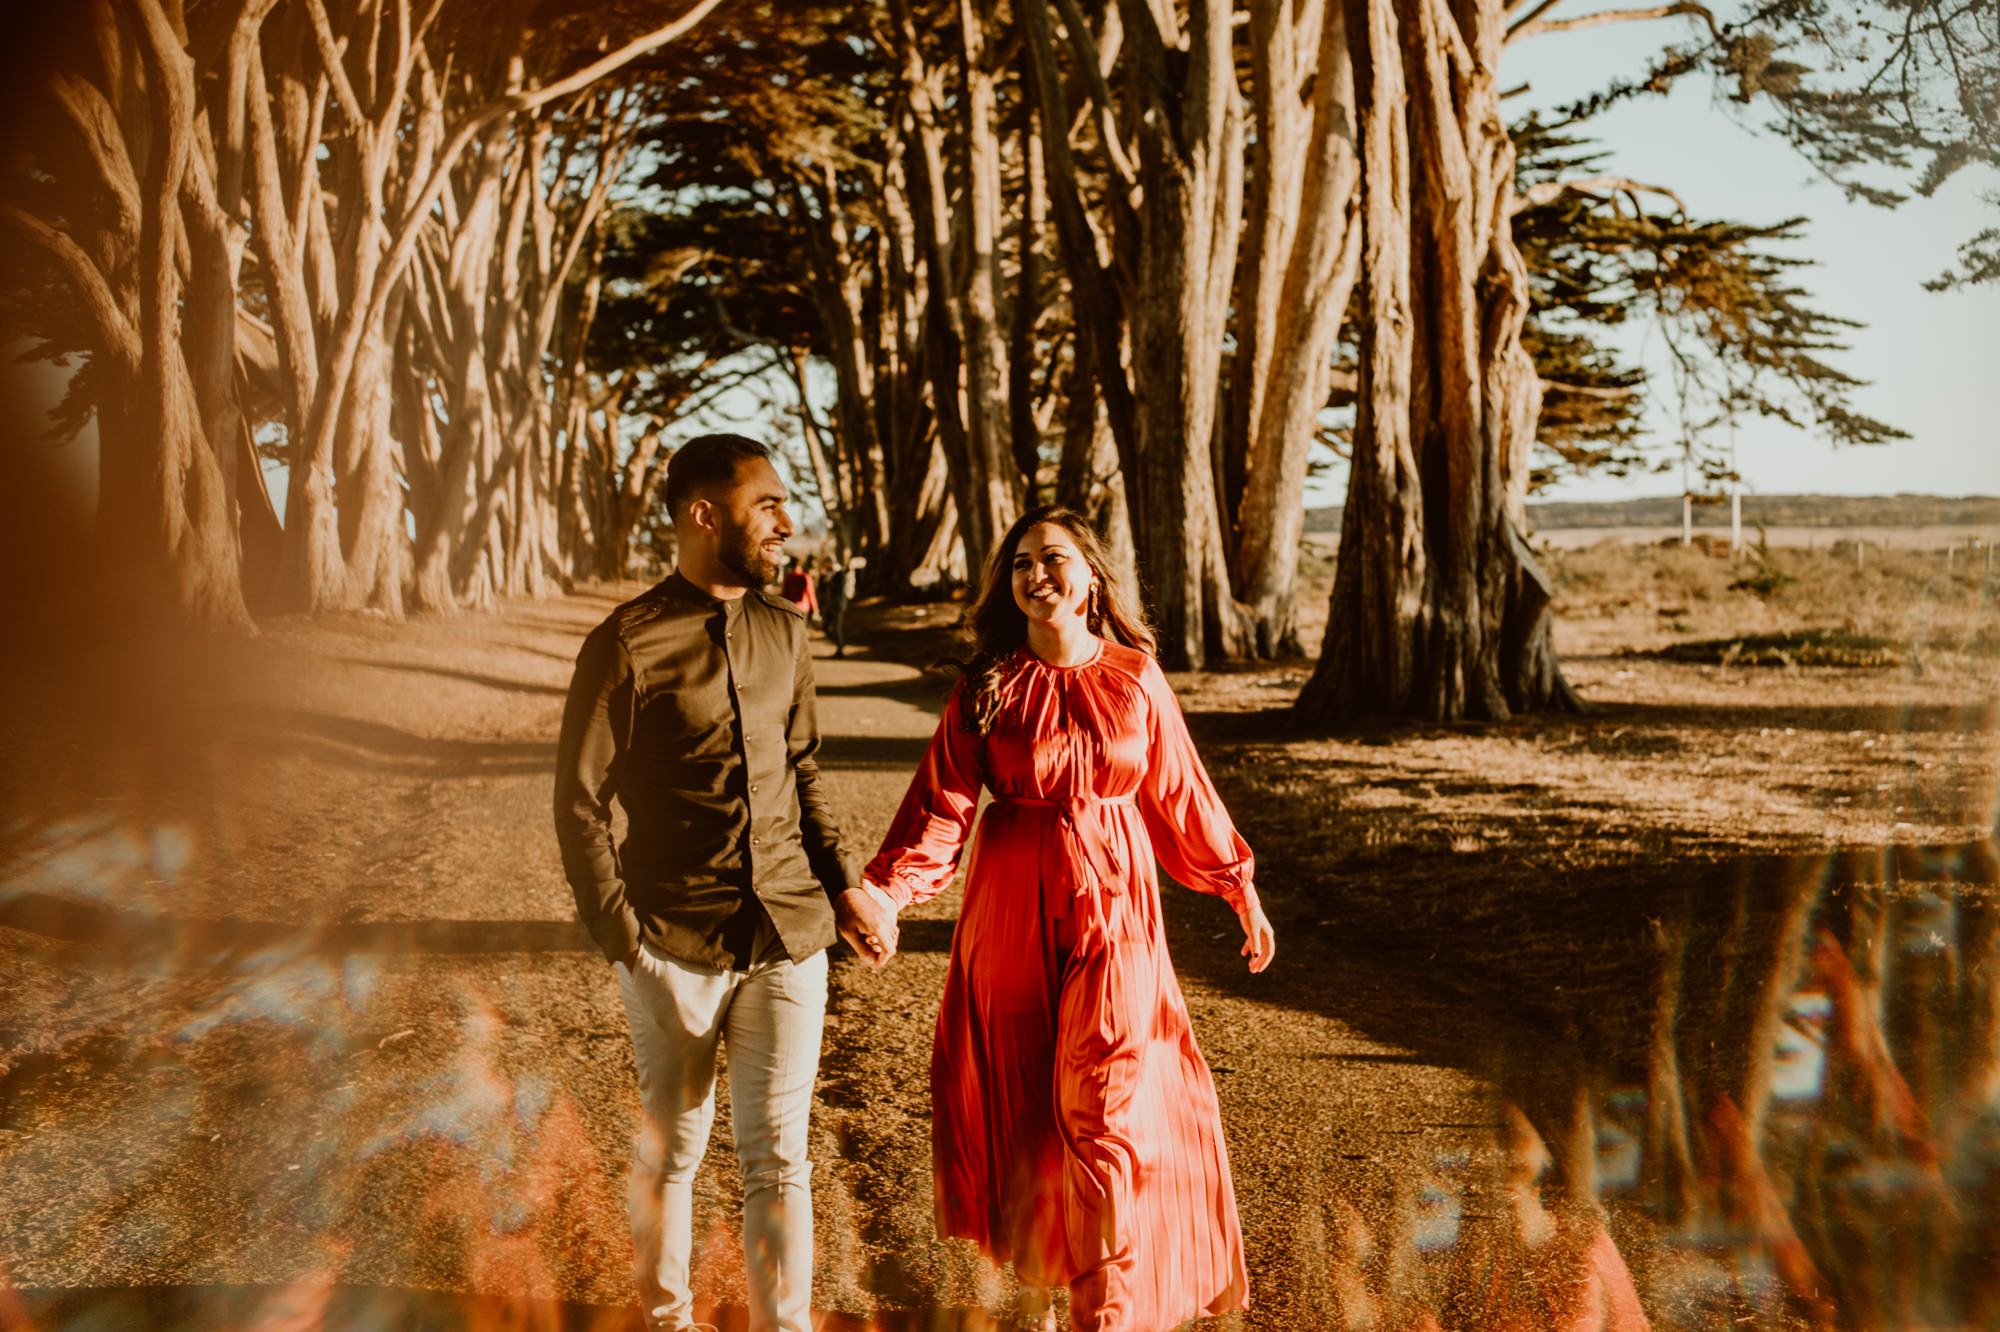 A man and woman run toward the camera while holding hands in the sunlight under the Cypress Tree Tunnel during their Point Reyes engagement session.